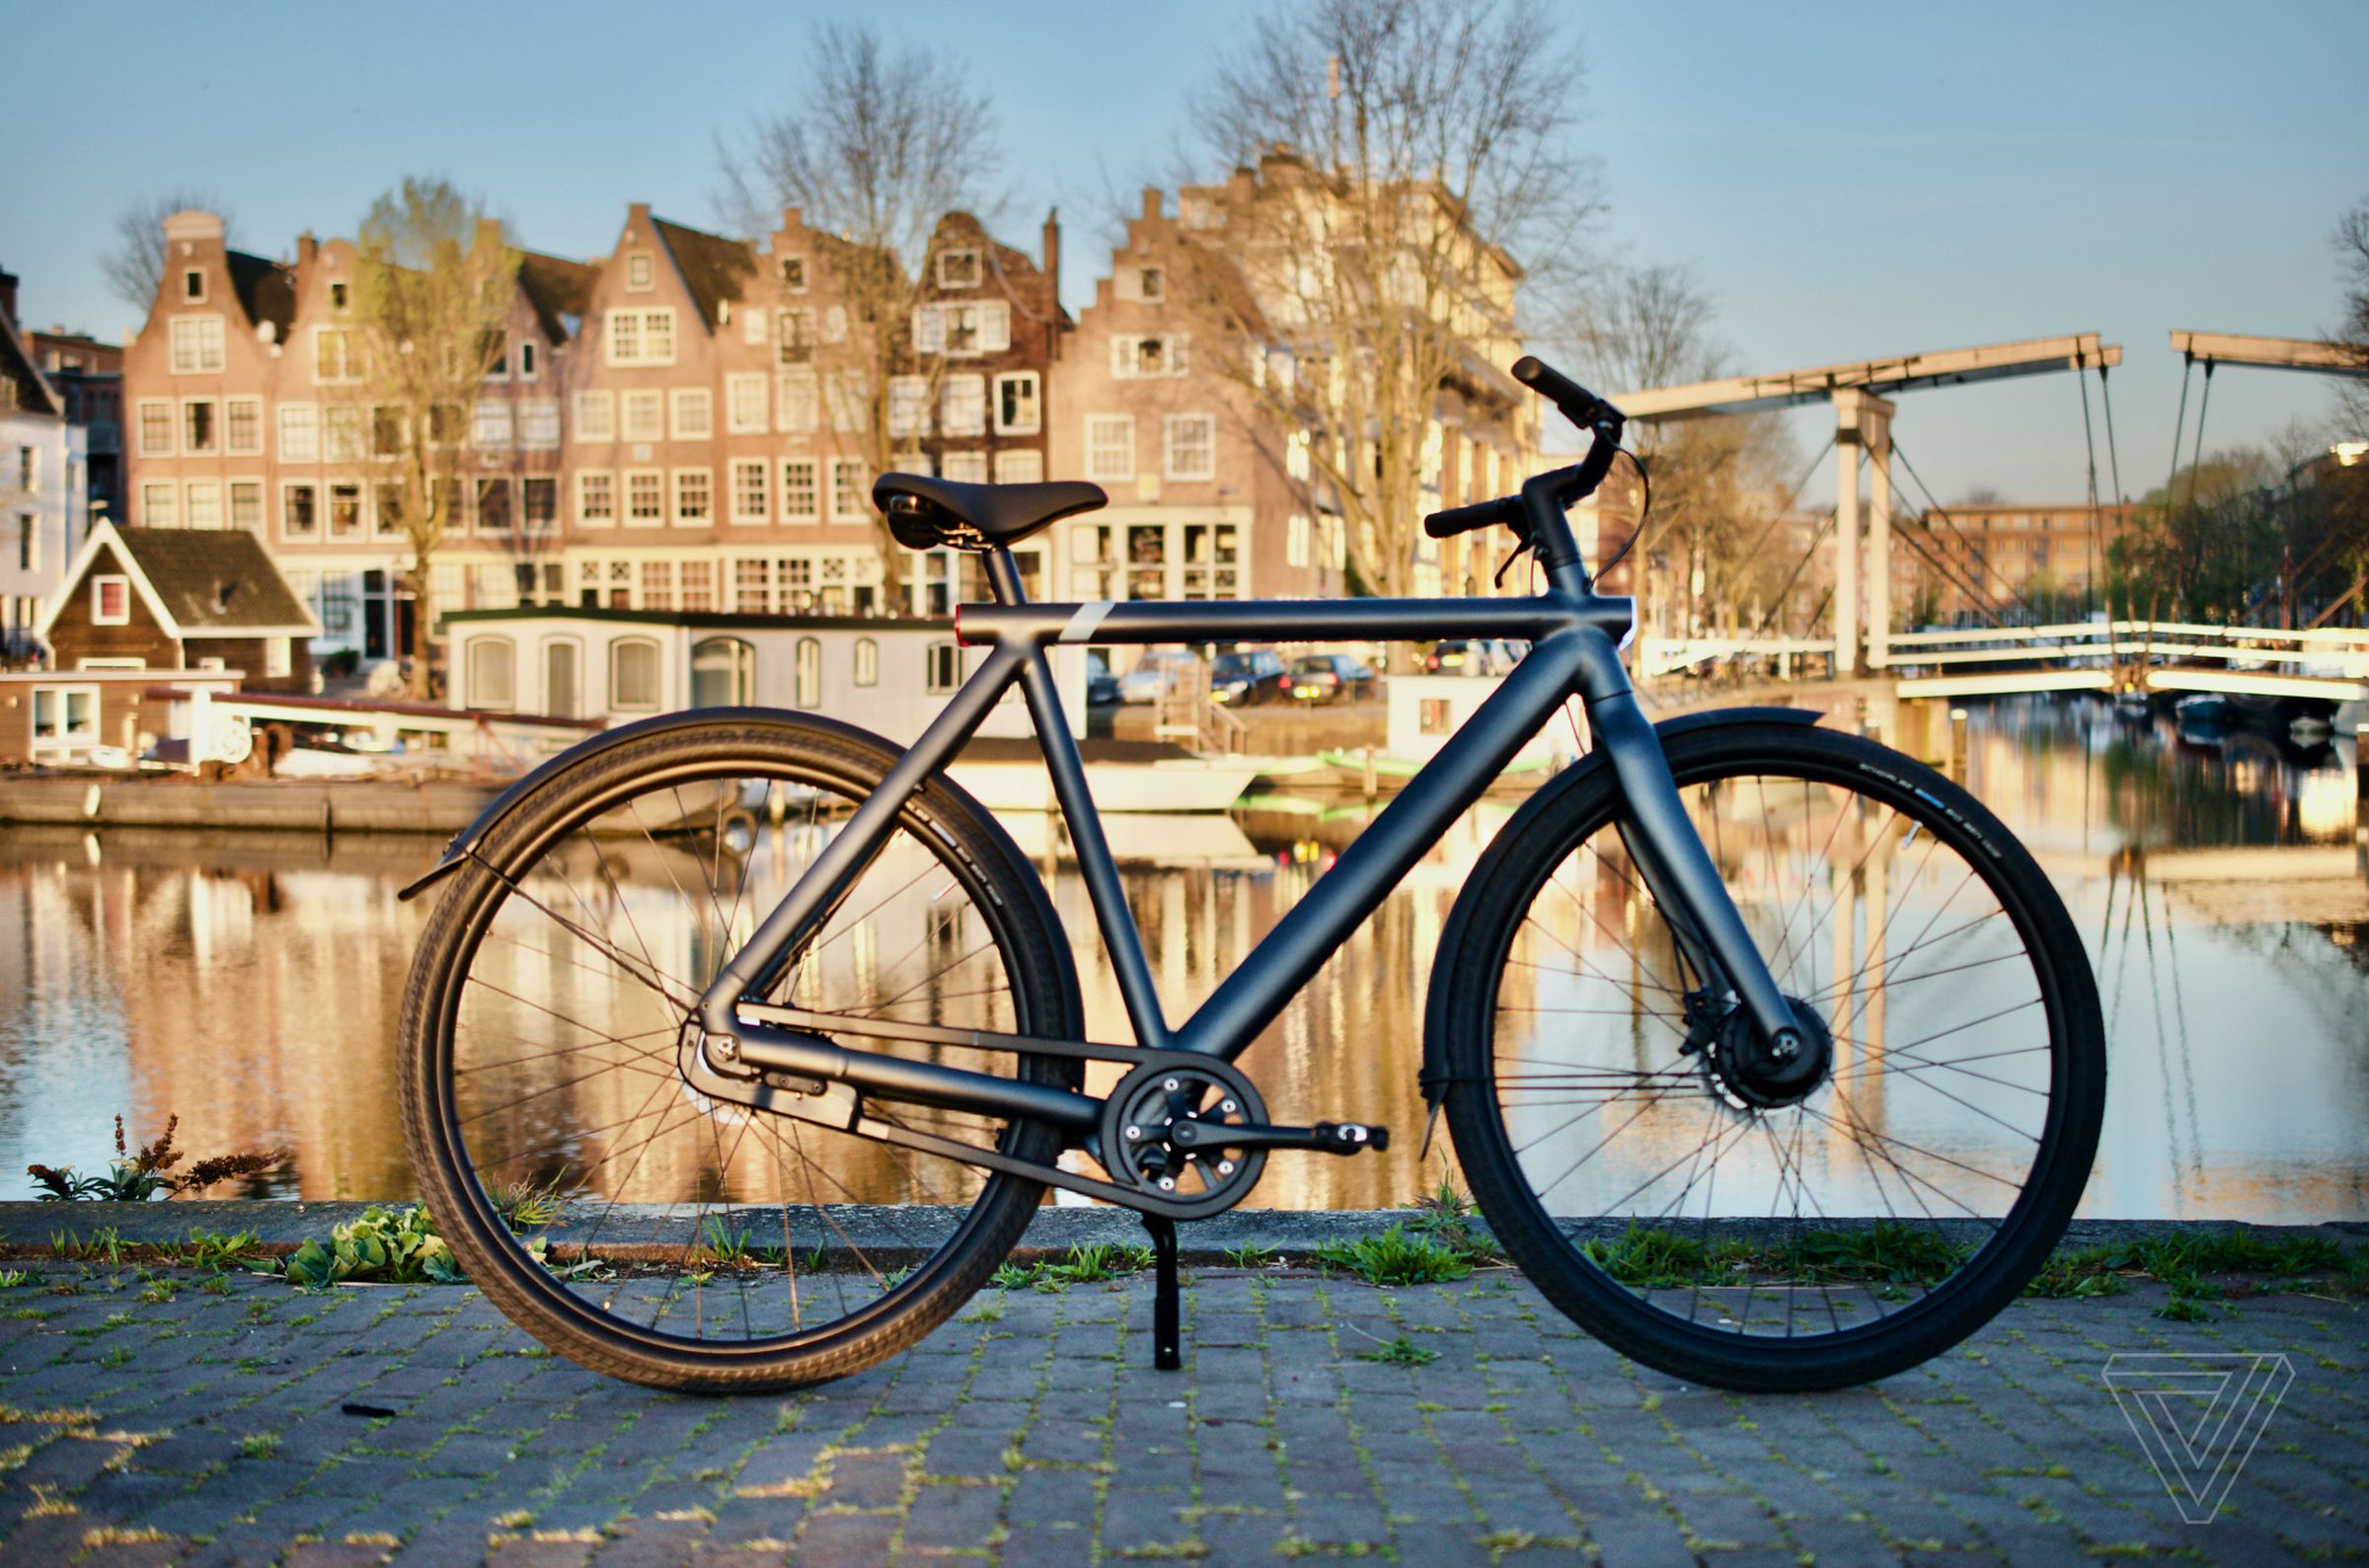 The VanMoof S3 in Amsterdam.